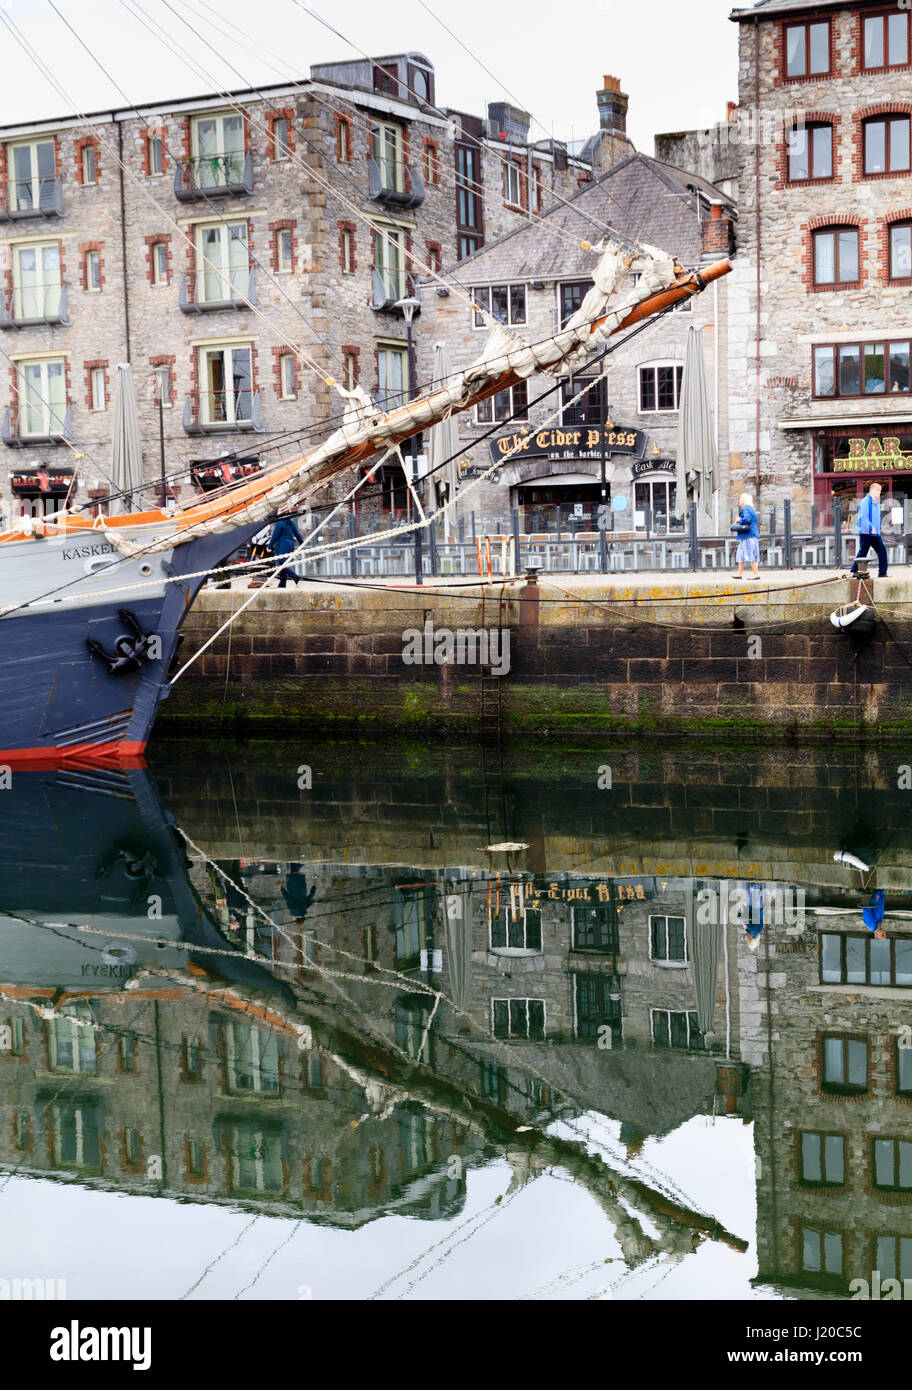 Prow of the tall ship, S.V.Kaskelot, reflected in the water of Sutton Harbour, Plymouth, UK, April 2017.  Part of the Barbican behind. Stock Photo